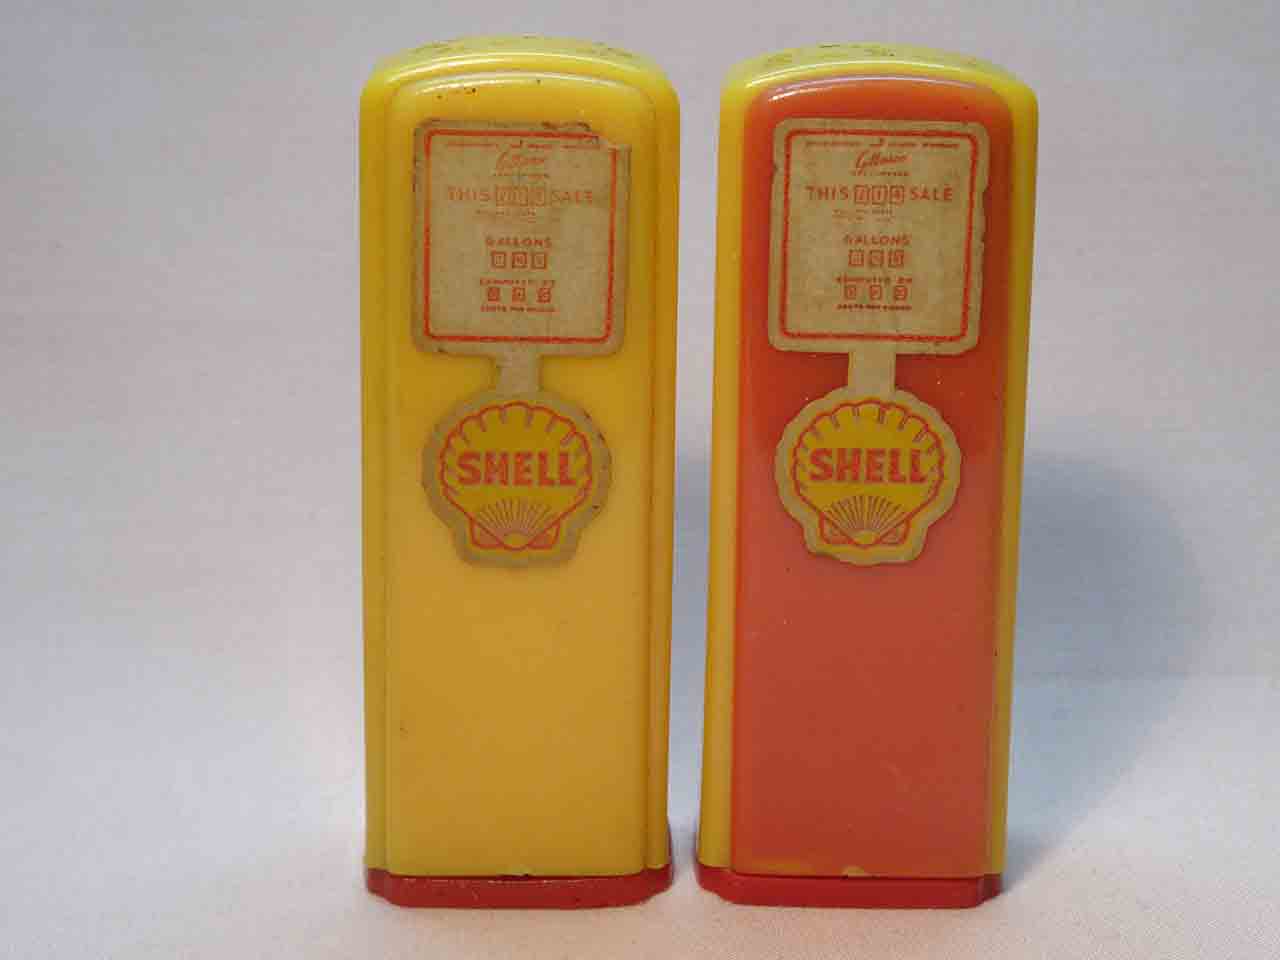 Plastic advertising gas pumps salt and pepper shakers - Shell